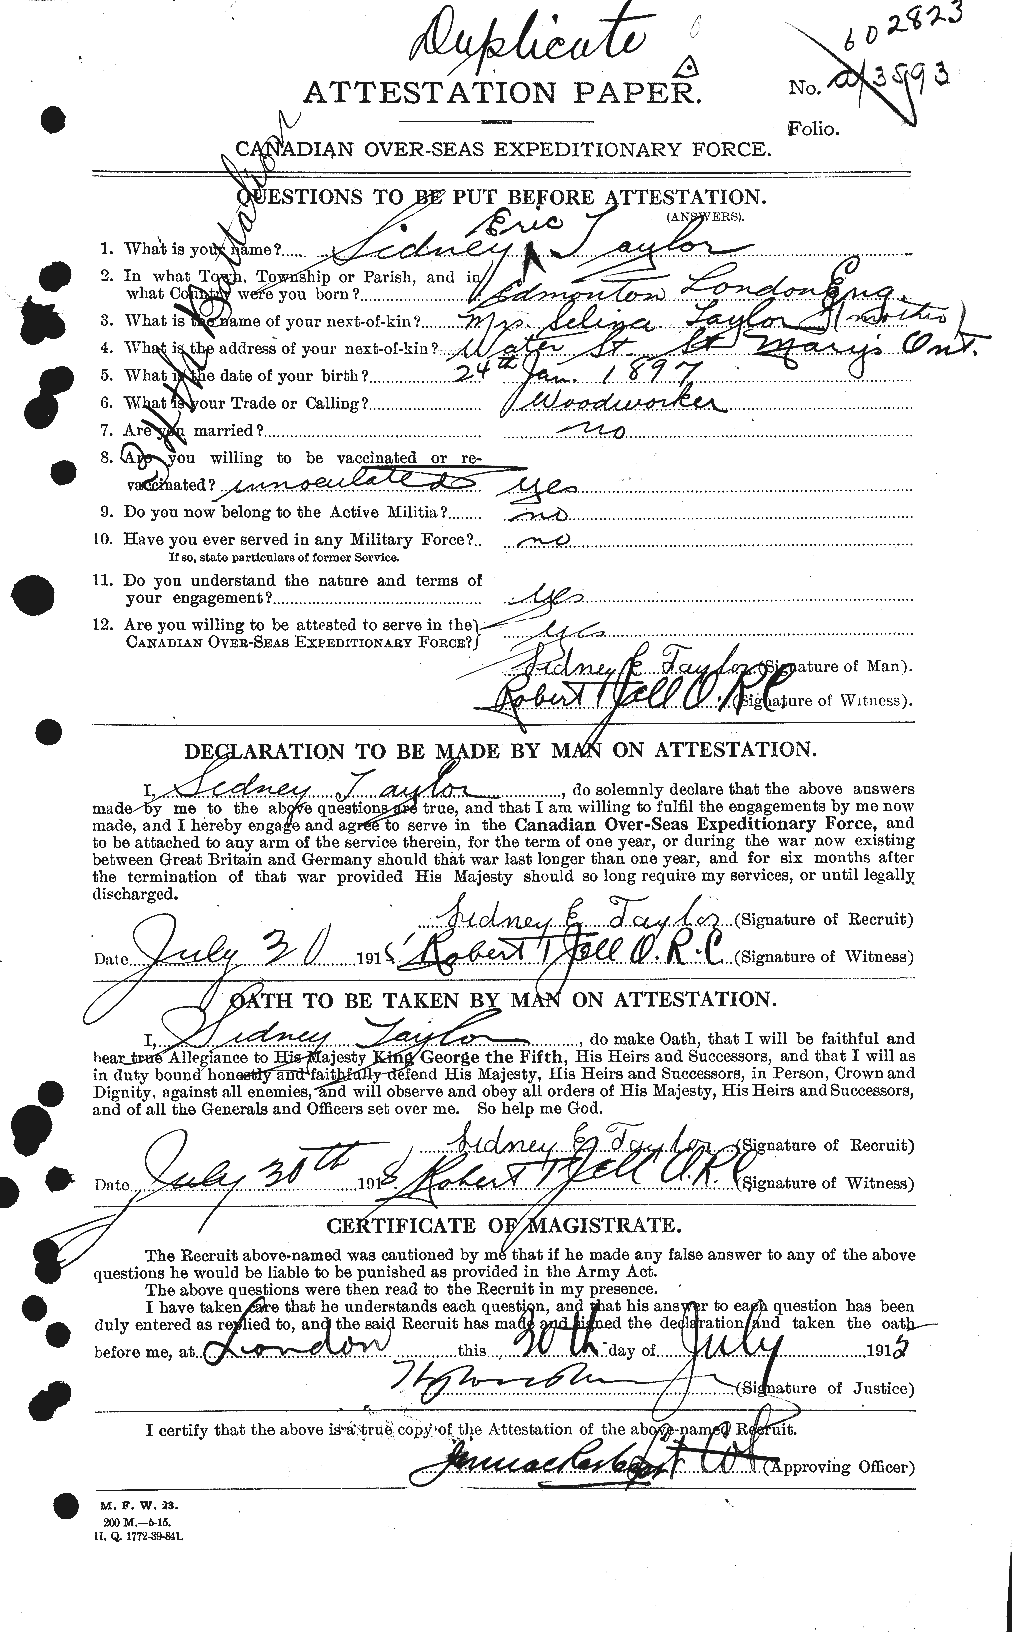 Personnel Records of the First World War - CEF 627898a